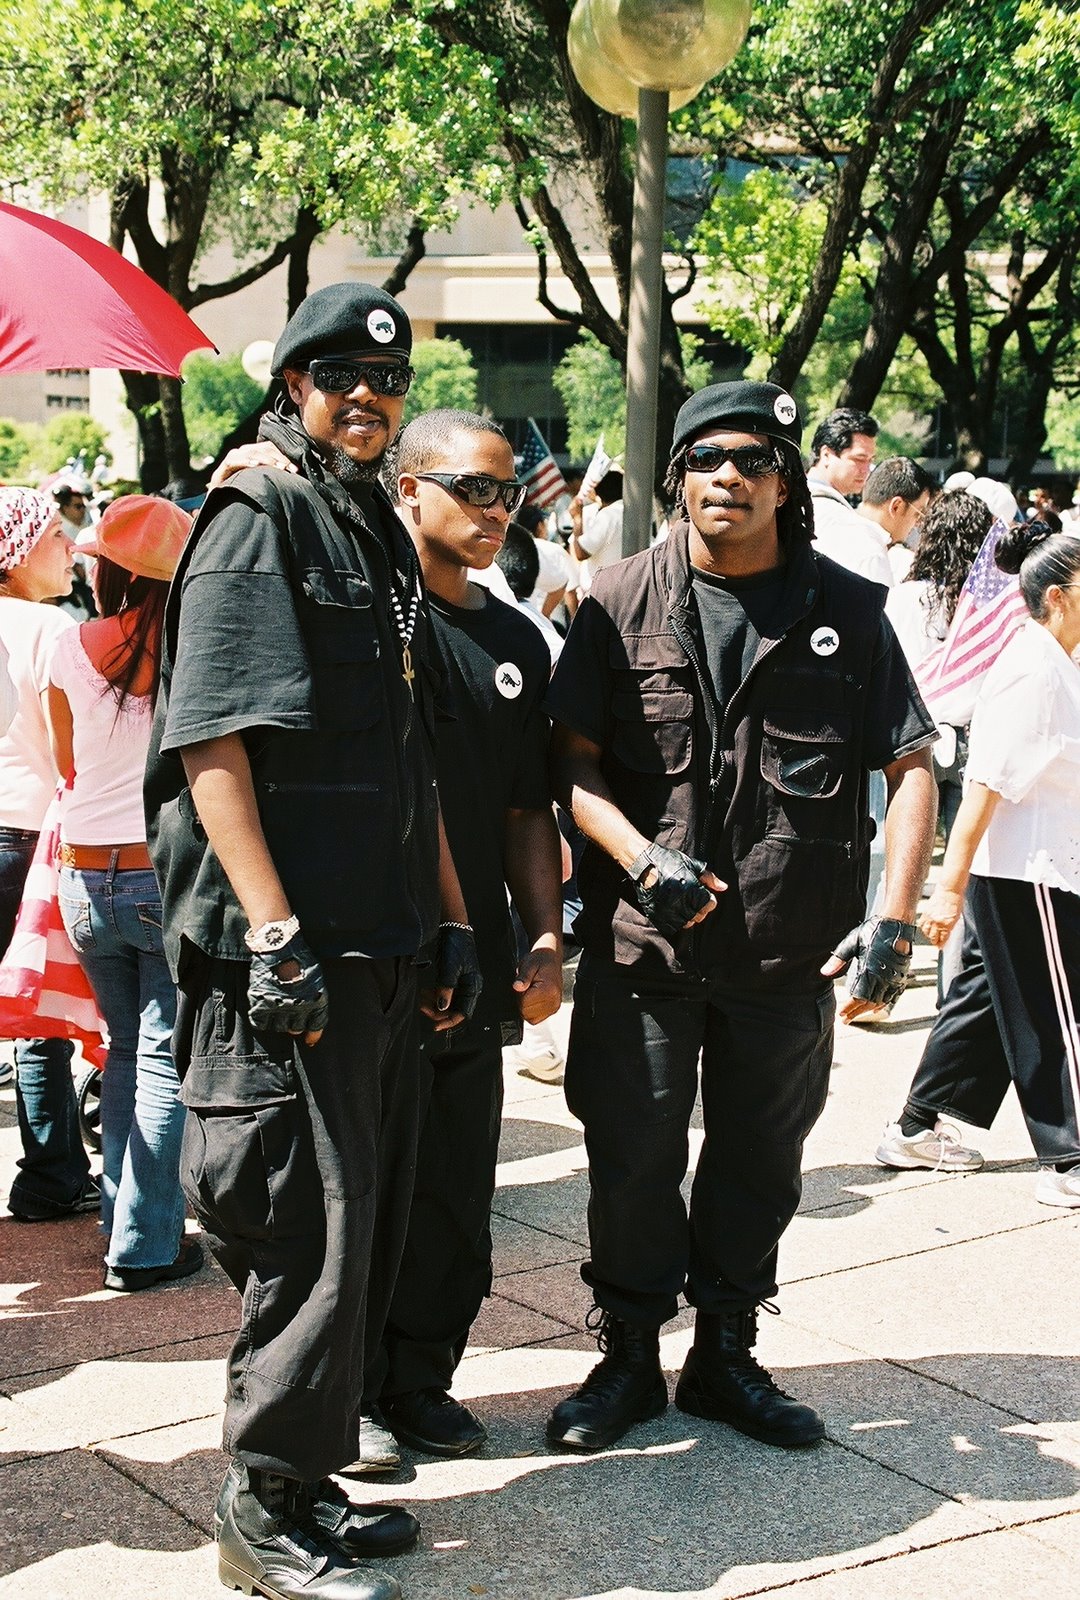 [The+New+Black+Panthers+supporting+Immigration+March.jpg]